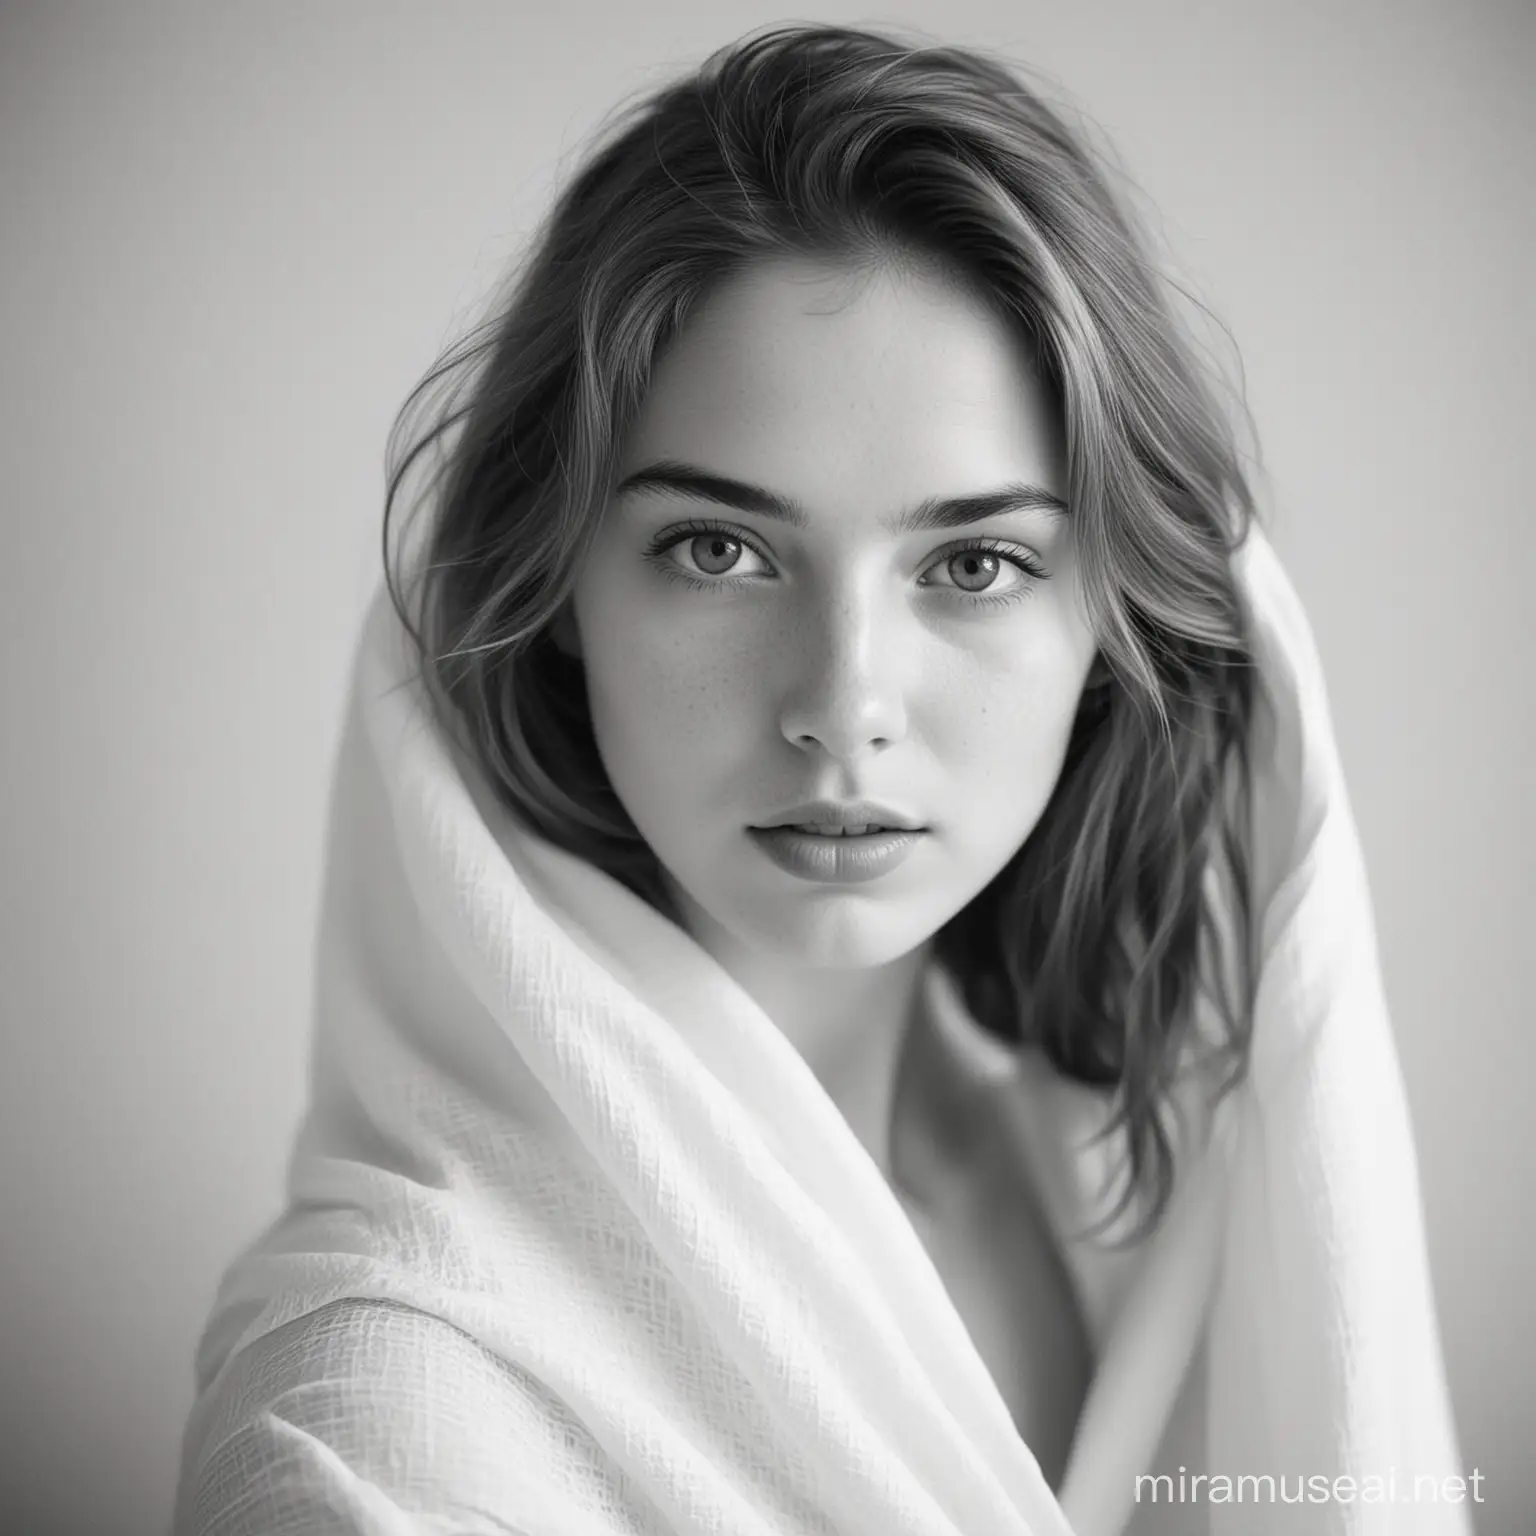 black and white photography, white fabric, using a 35mm lens, f/2, film, grain, beautiful girl, portrait